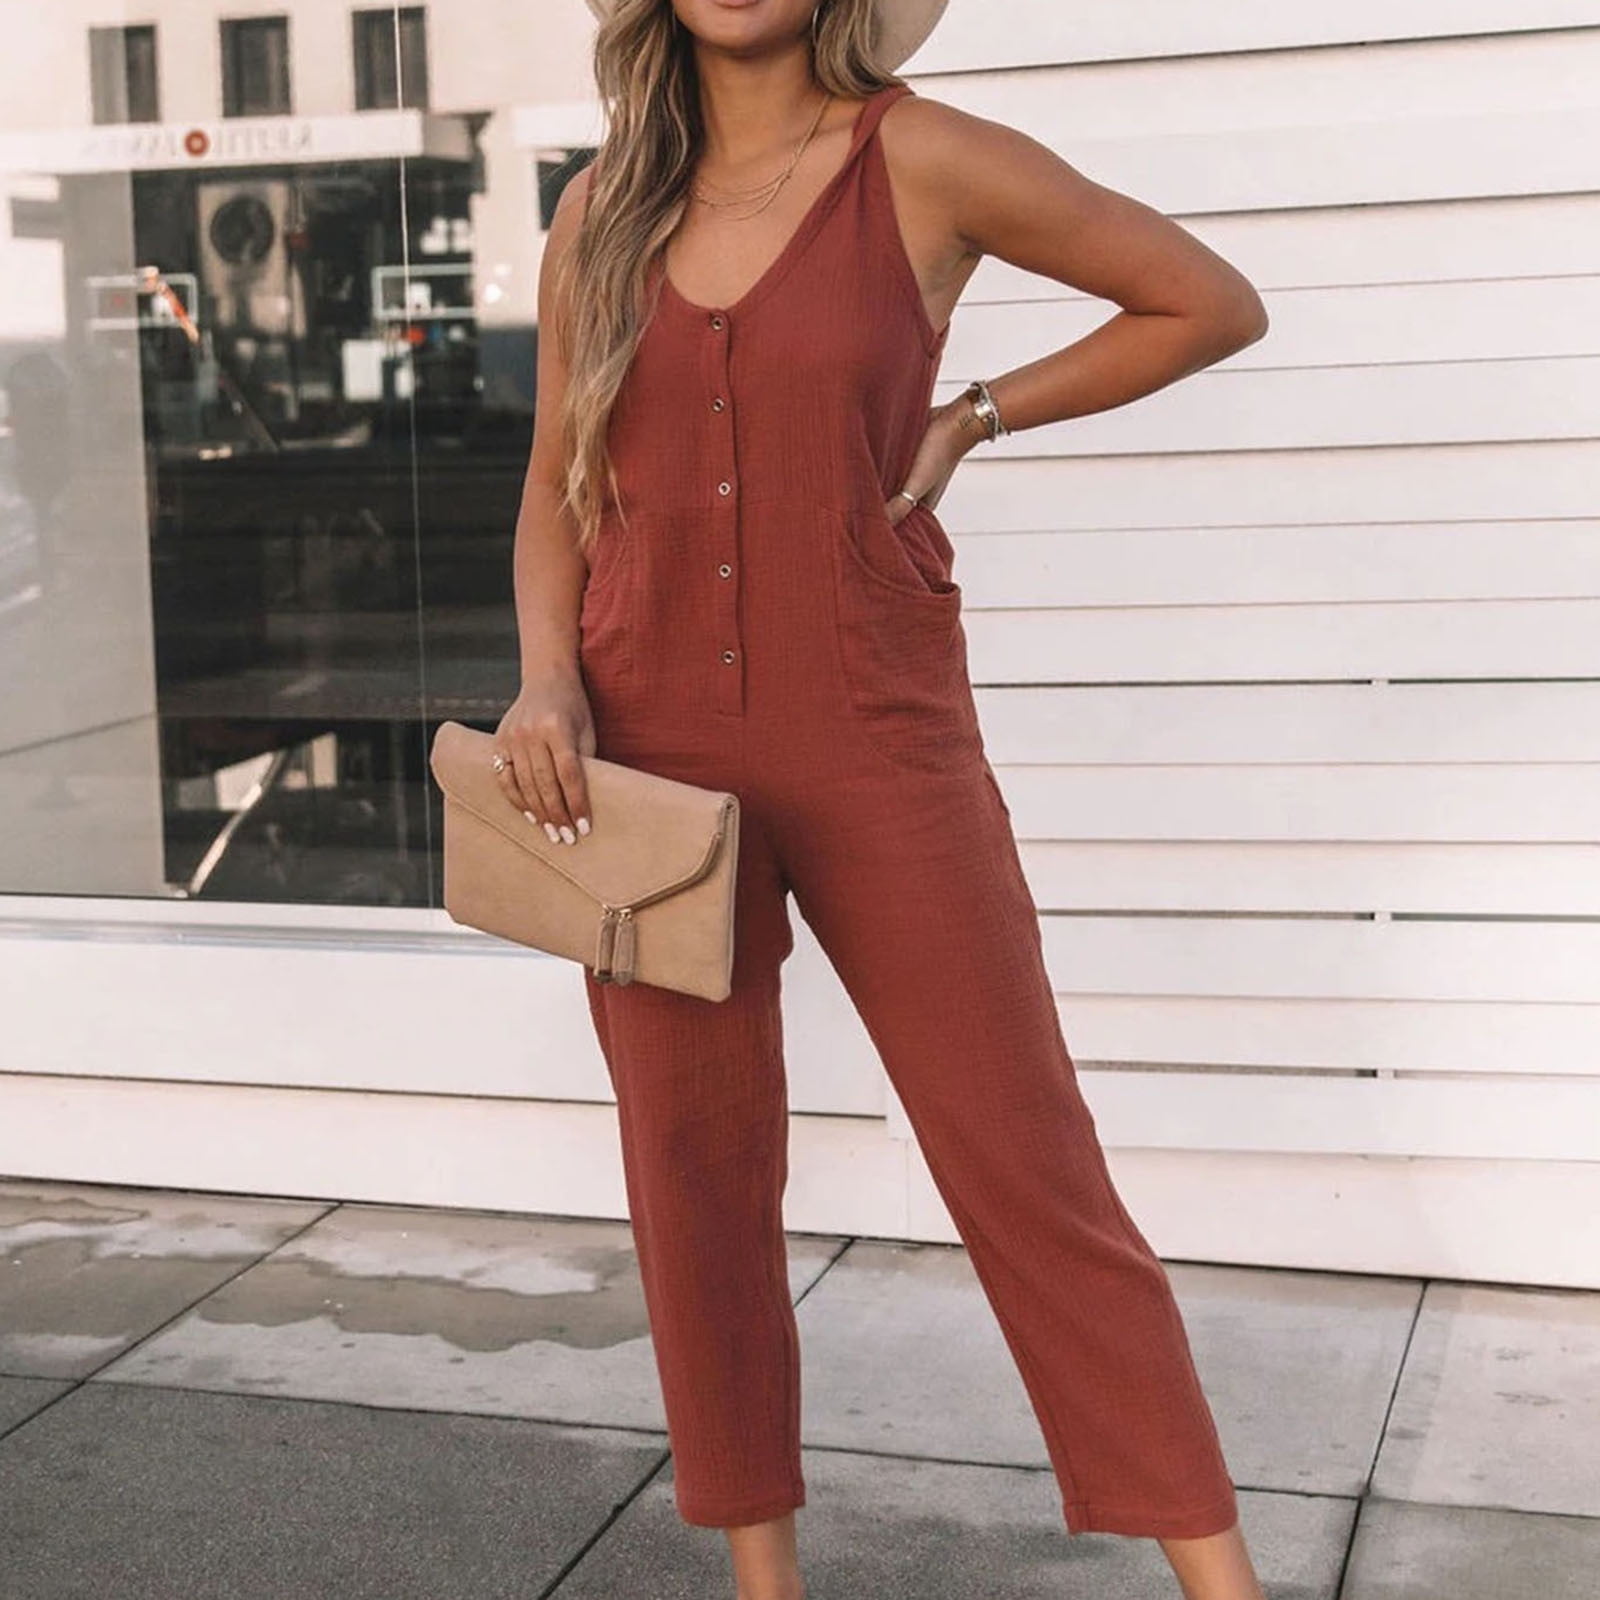 YWDJ Womens Jumpsuits Summer Casual Sleeveless Summer Long Sleeve Gentle  Solid Color Button Long Jumpsuit A Popular Choice for Everyday Wear Going  to